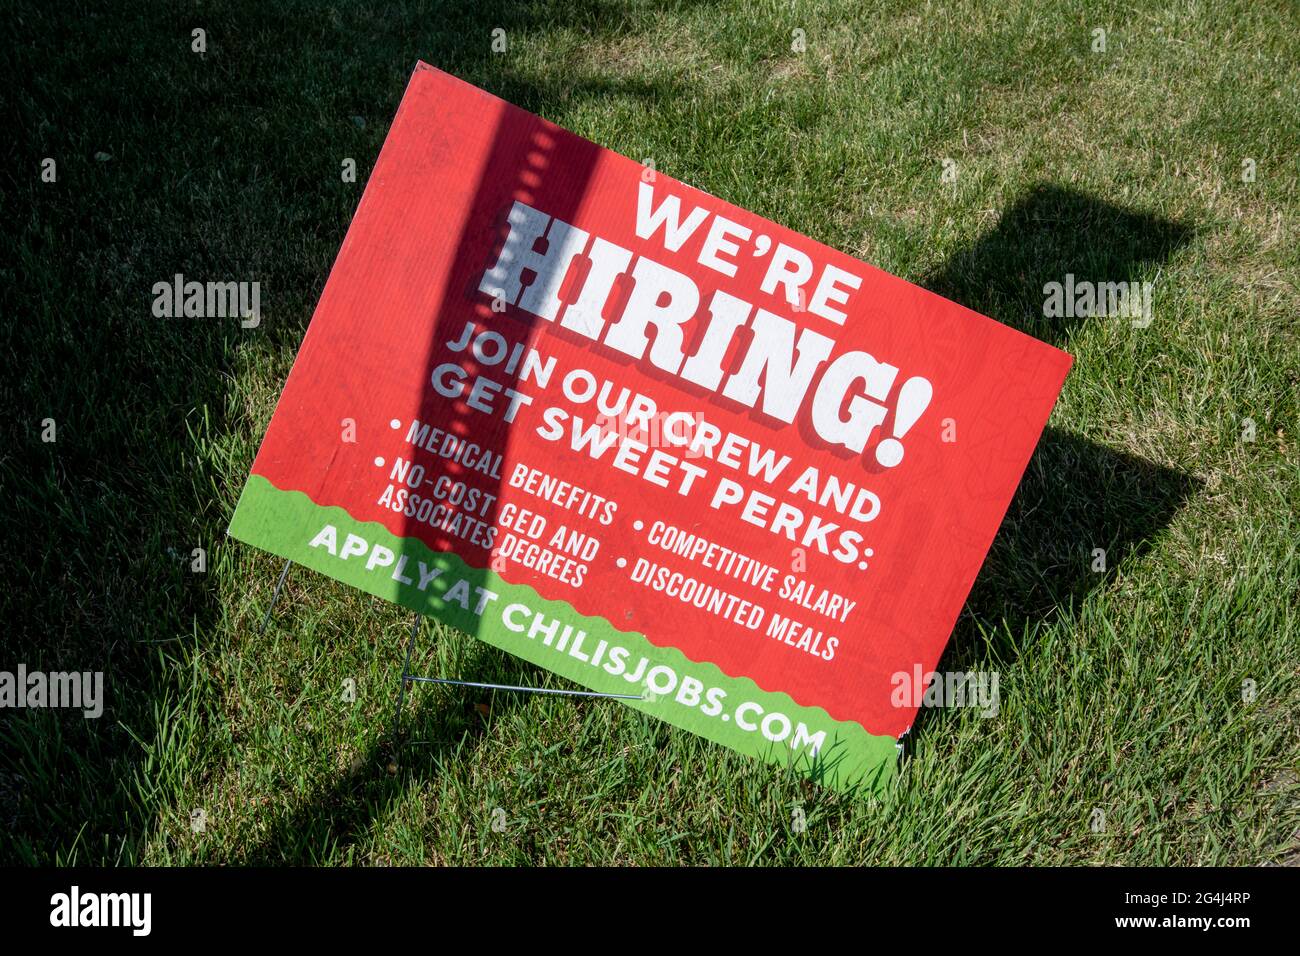 Roseville, Minnesota. Hiring sign at Chili's bar and grill with plenty of incentives. Stock Photo